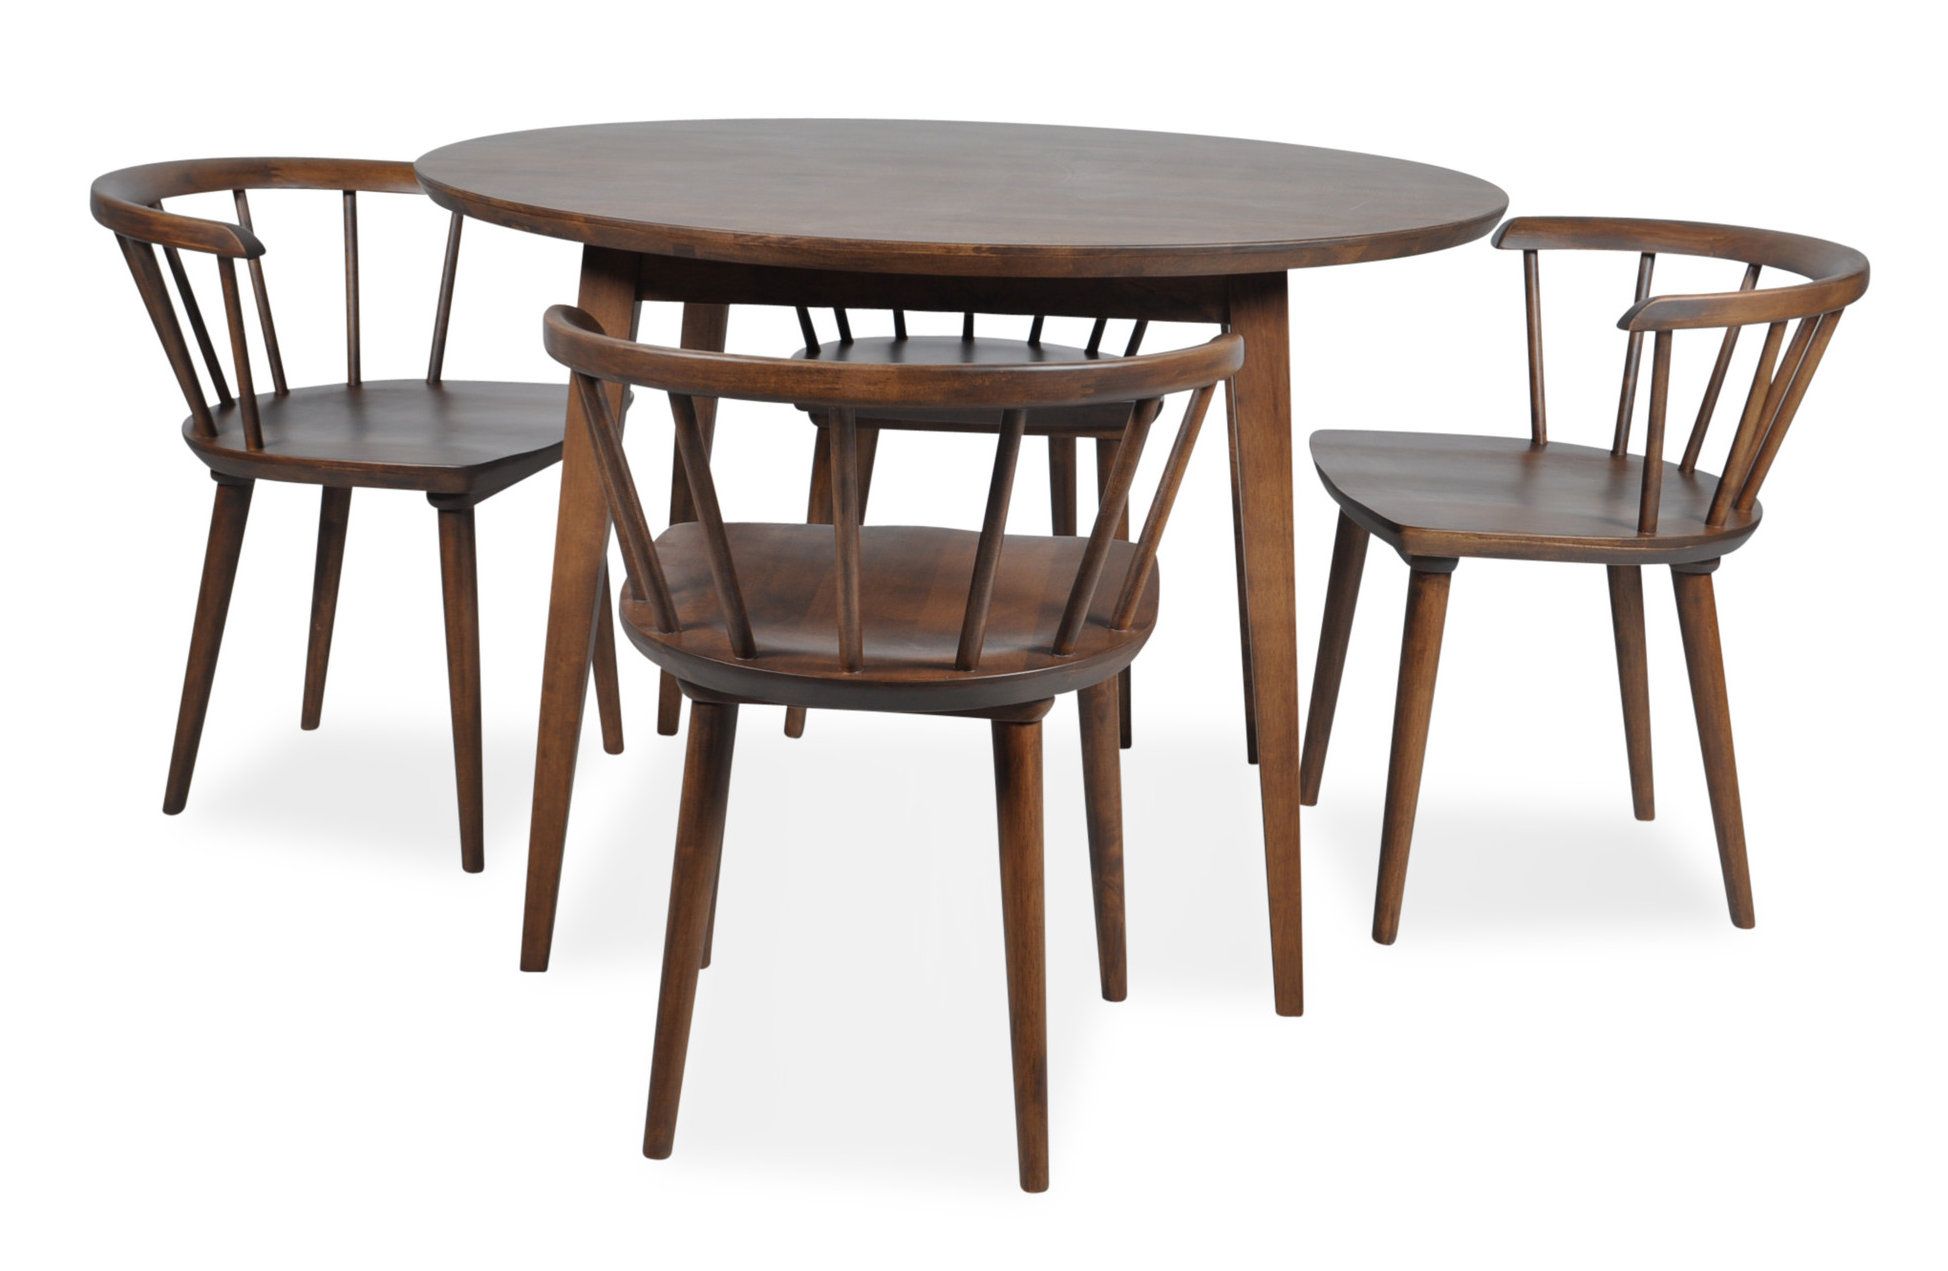 Widely Used 5 Piece Breakfast Nook Dining Sets For Burgan 5 Piece Solid Wood Breakfast Nook Dining Set & Reviews (Photo 10 of 20)